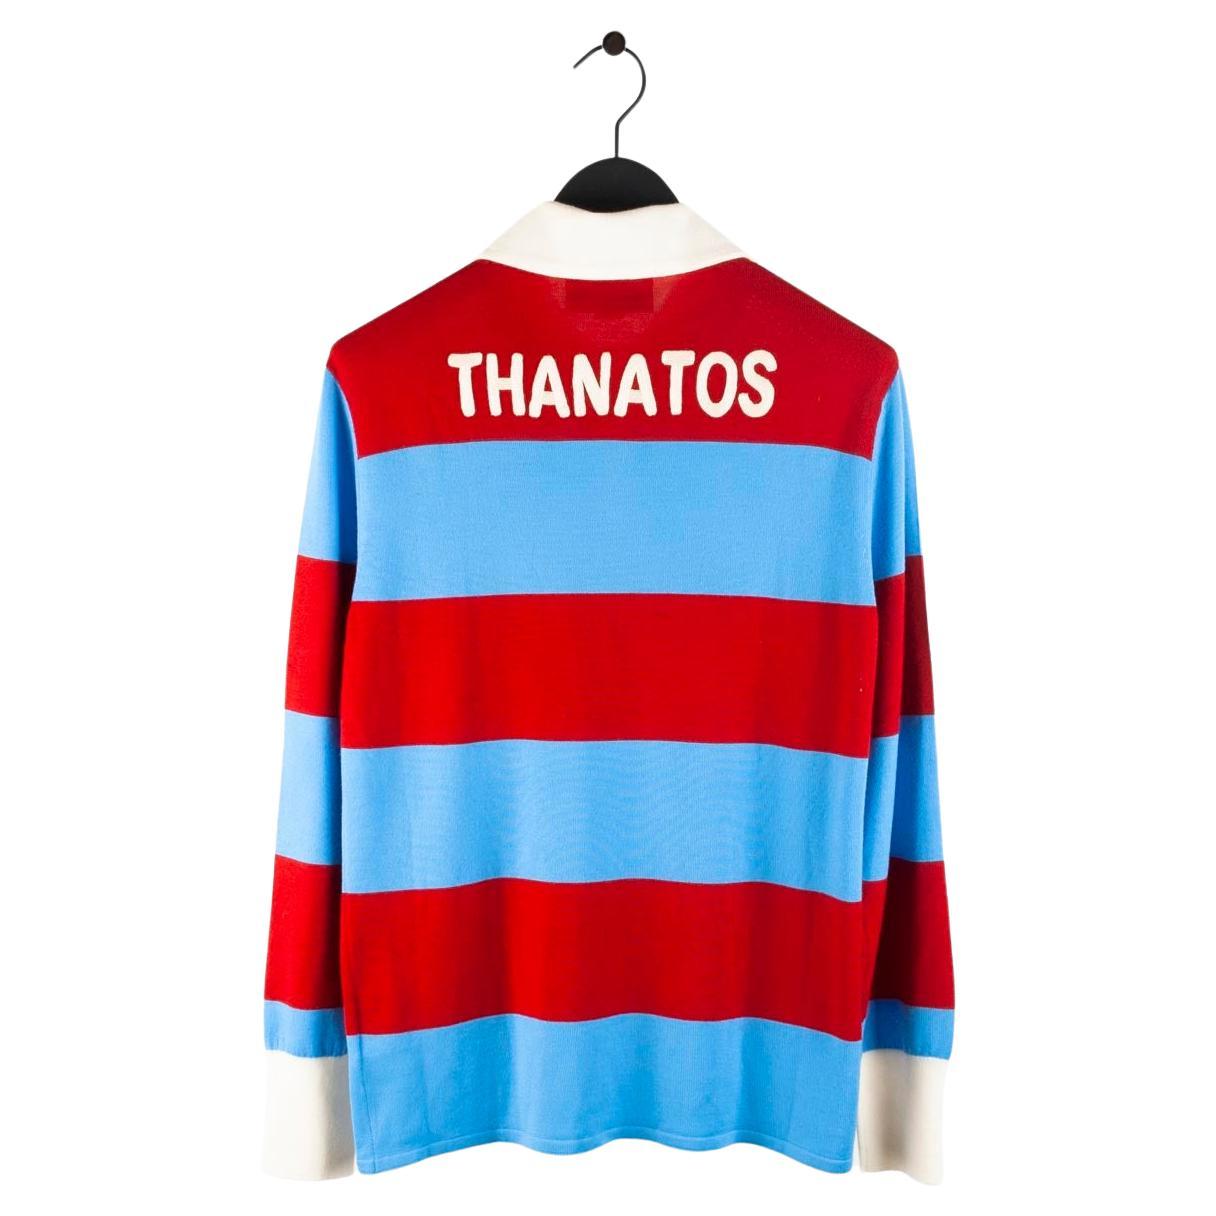 Gucci Thanatos Wool Rugby Men Sweatshirt Size M S519 For Sale